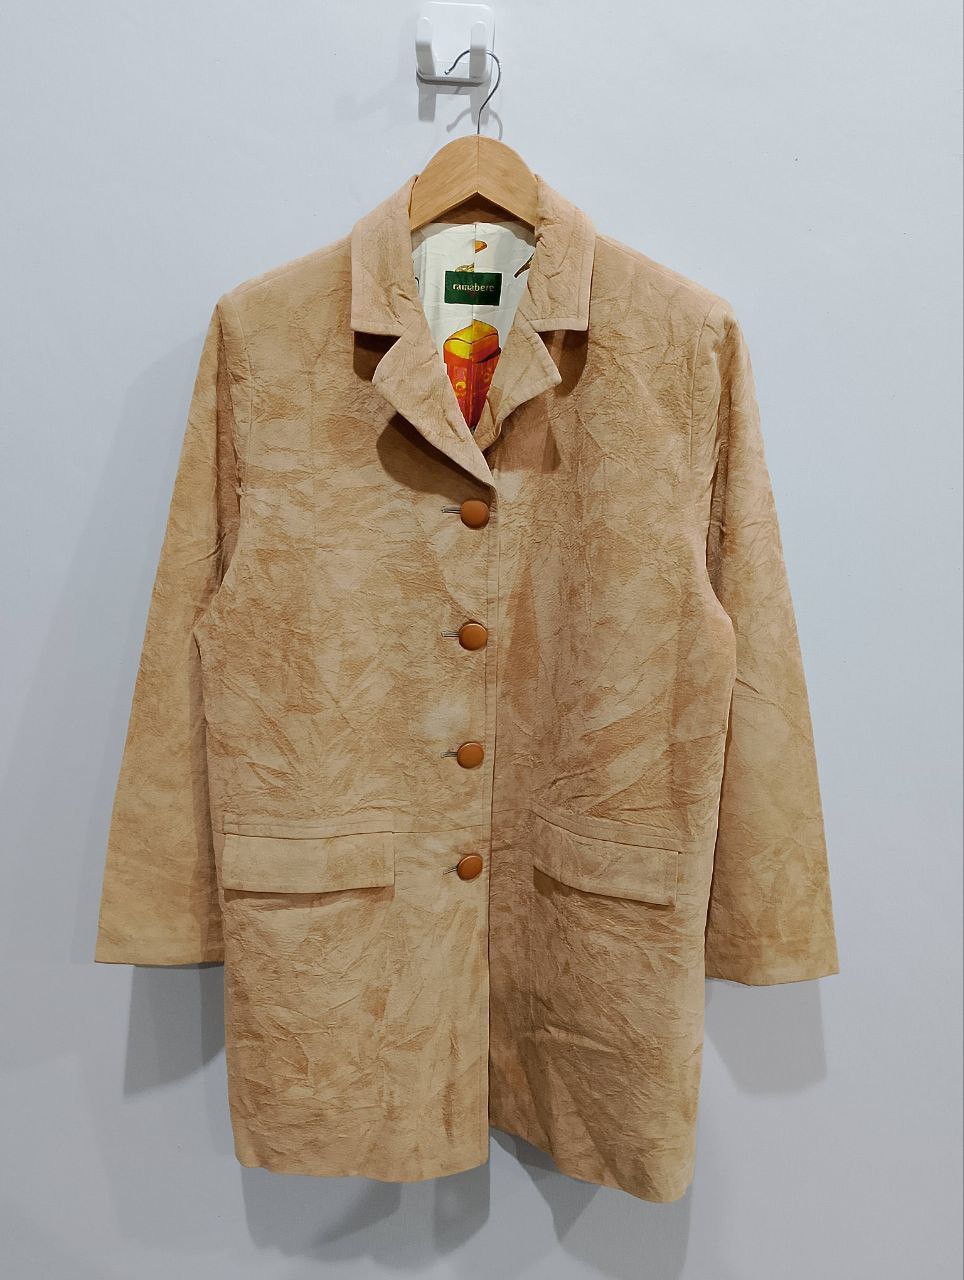 Archival Clothing - RAMABERE Tricot Japan Made Single Breasted Rayon Trench Coat - 2